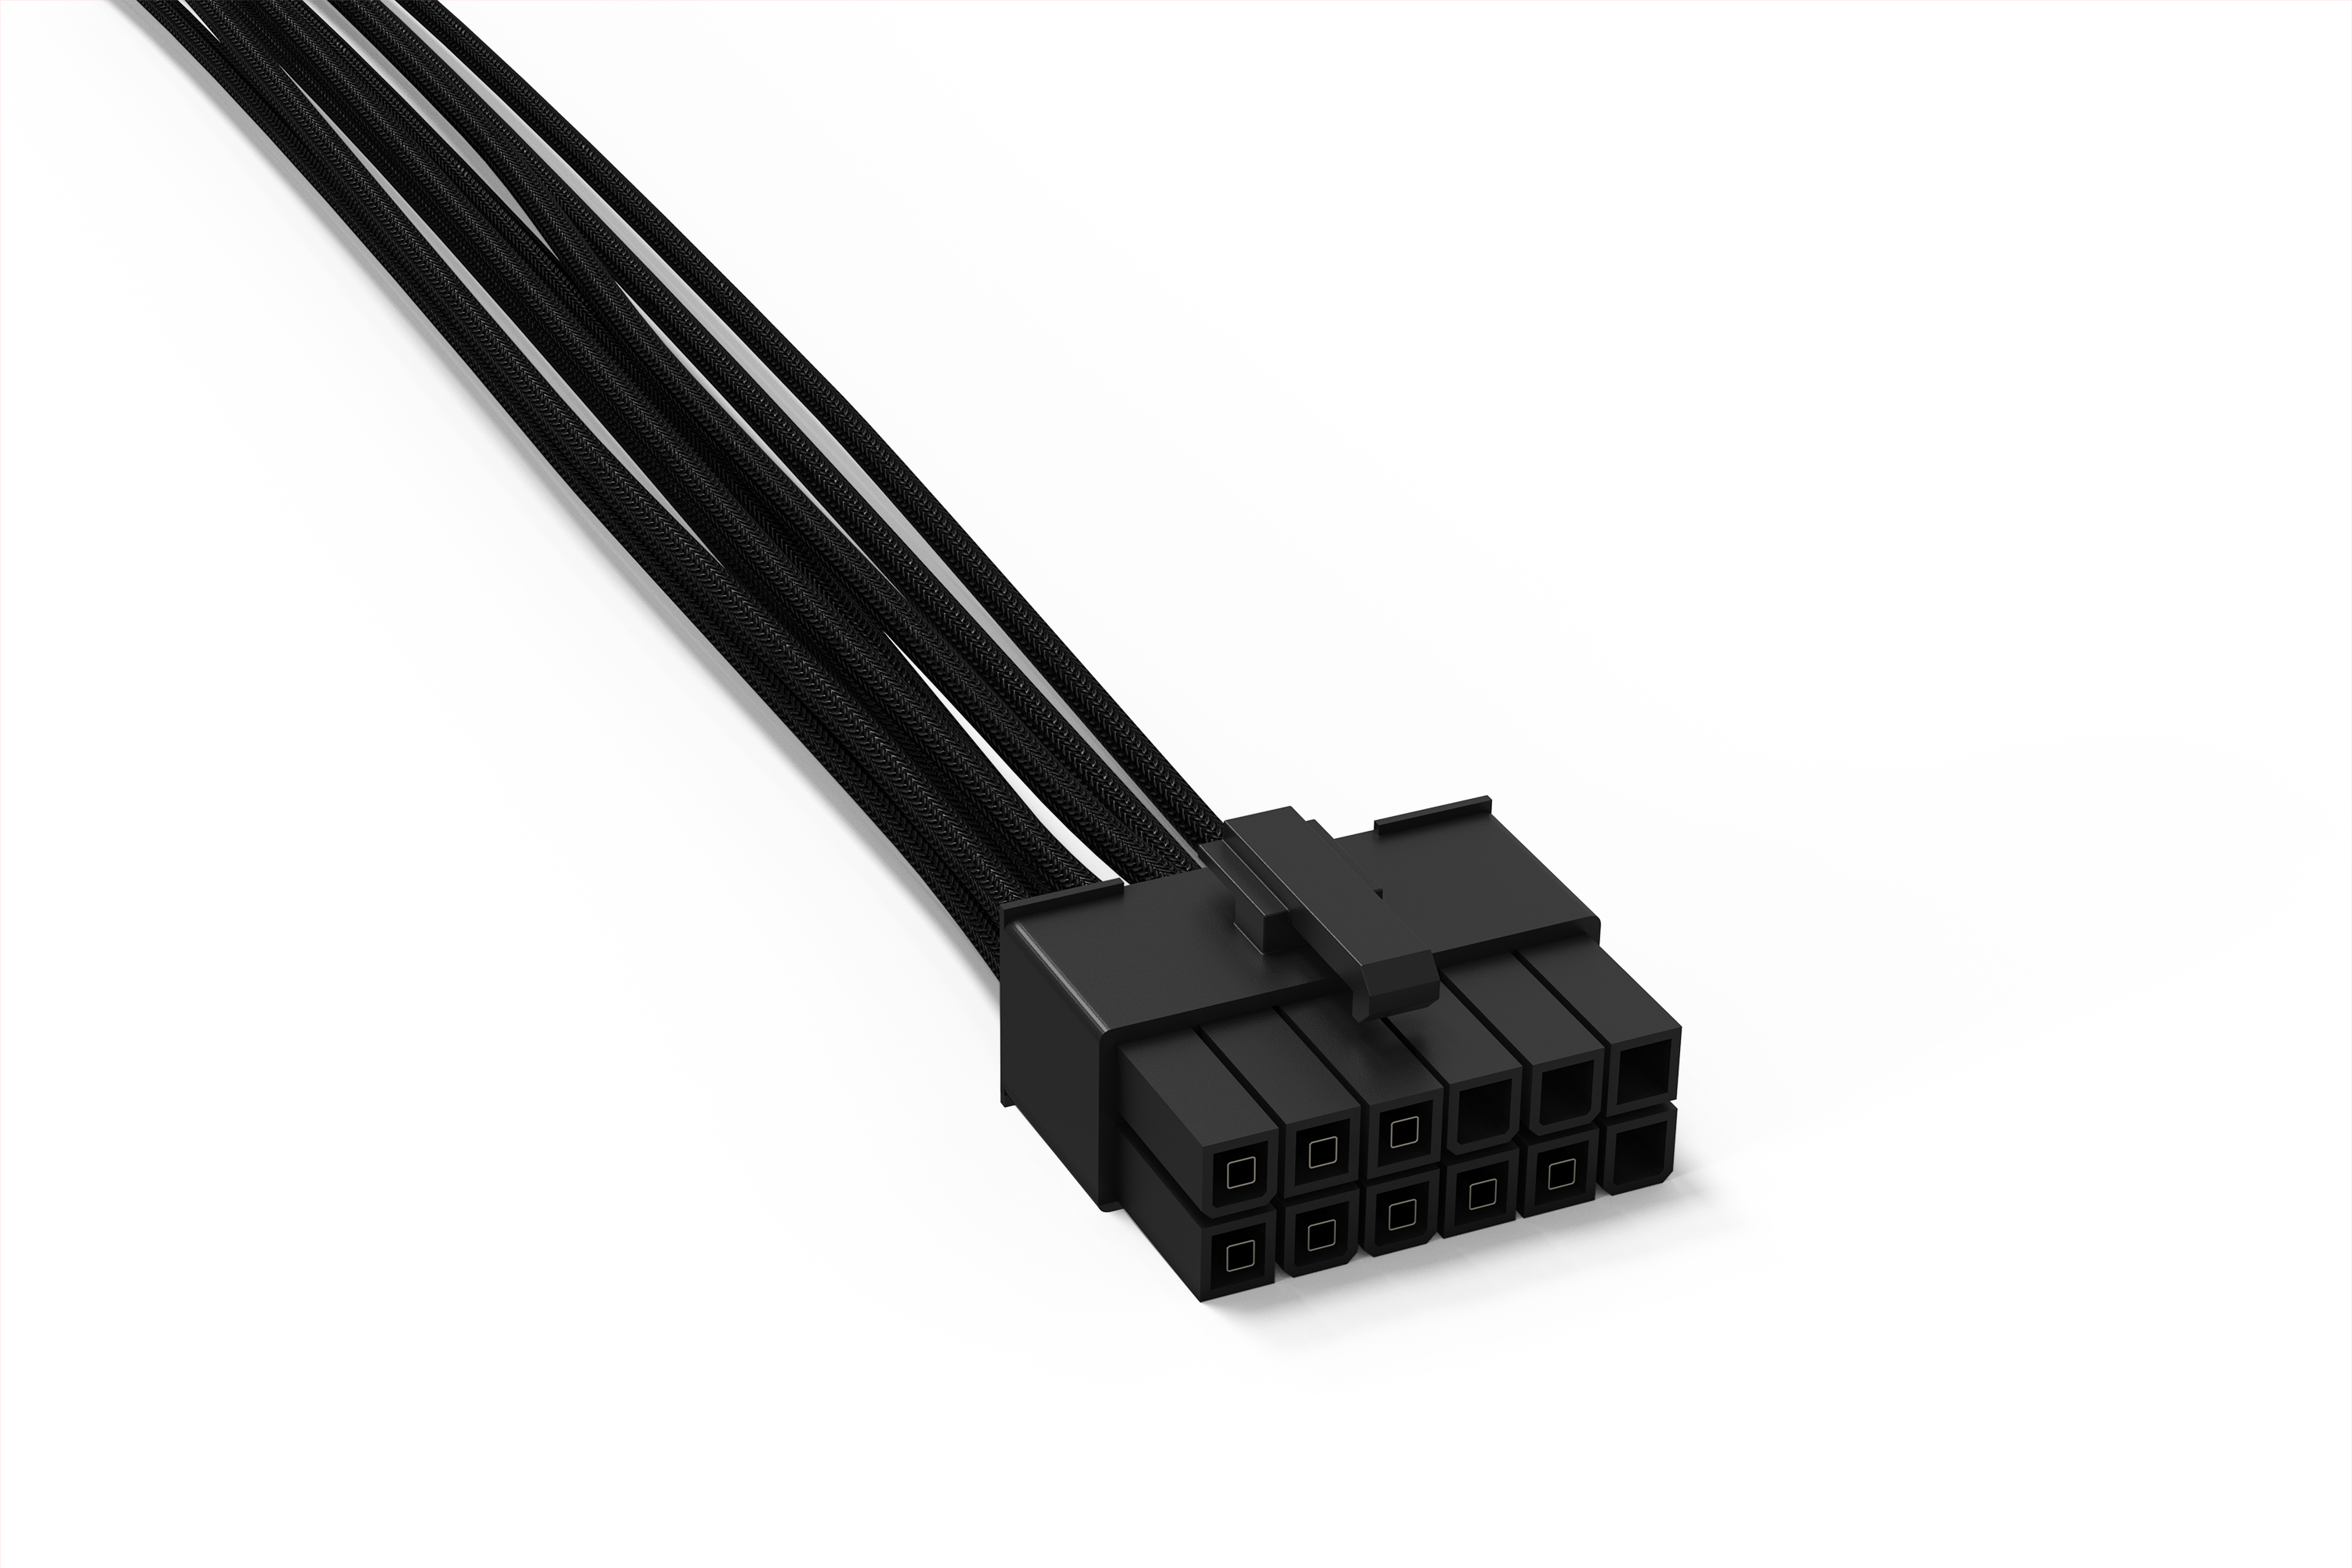 POWER CABLE | quiet! be CS-6610 from